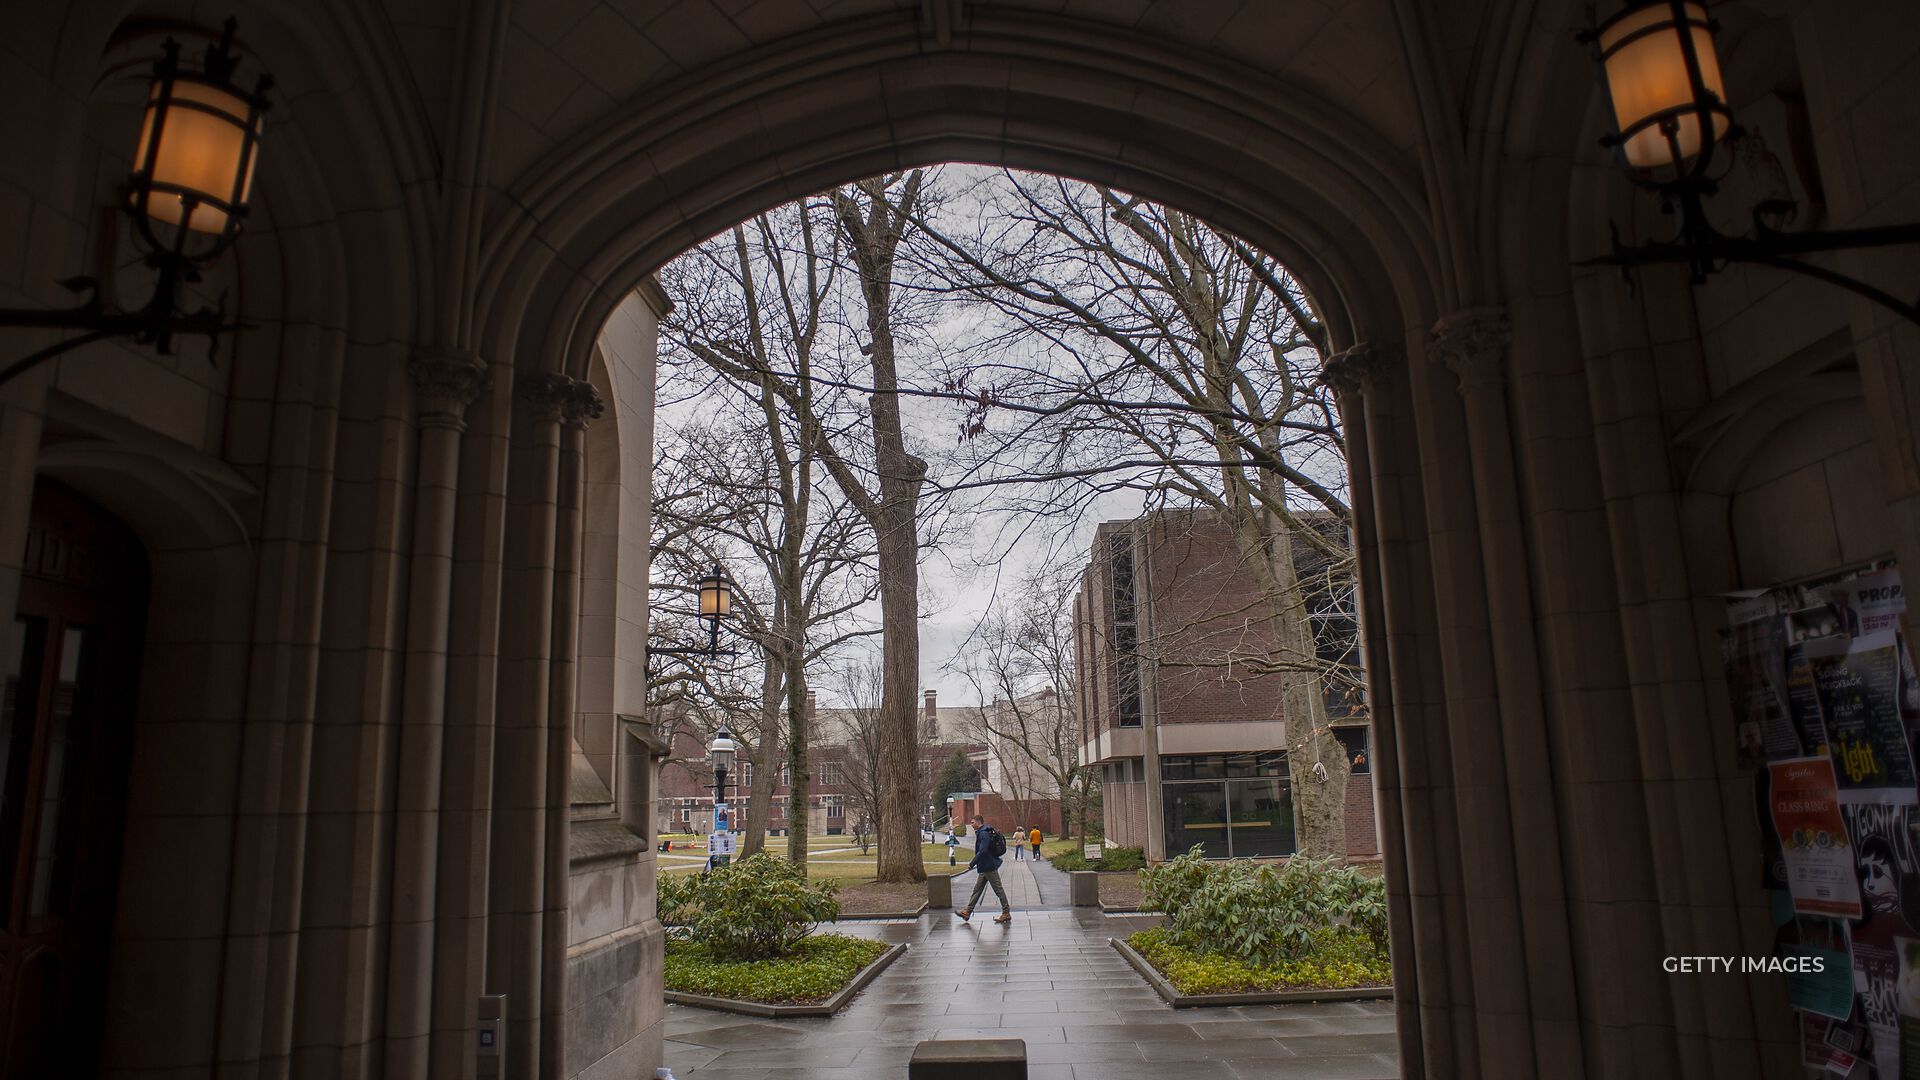 Princeton will extend its financial aid program to cover tuition, room and board for most students whose families make up to 0,000 per year.